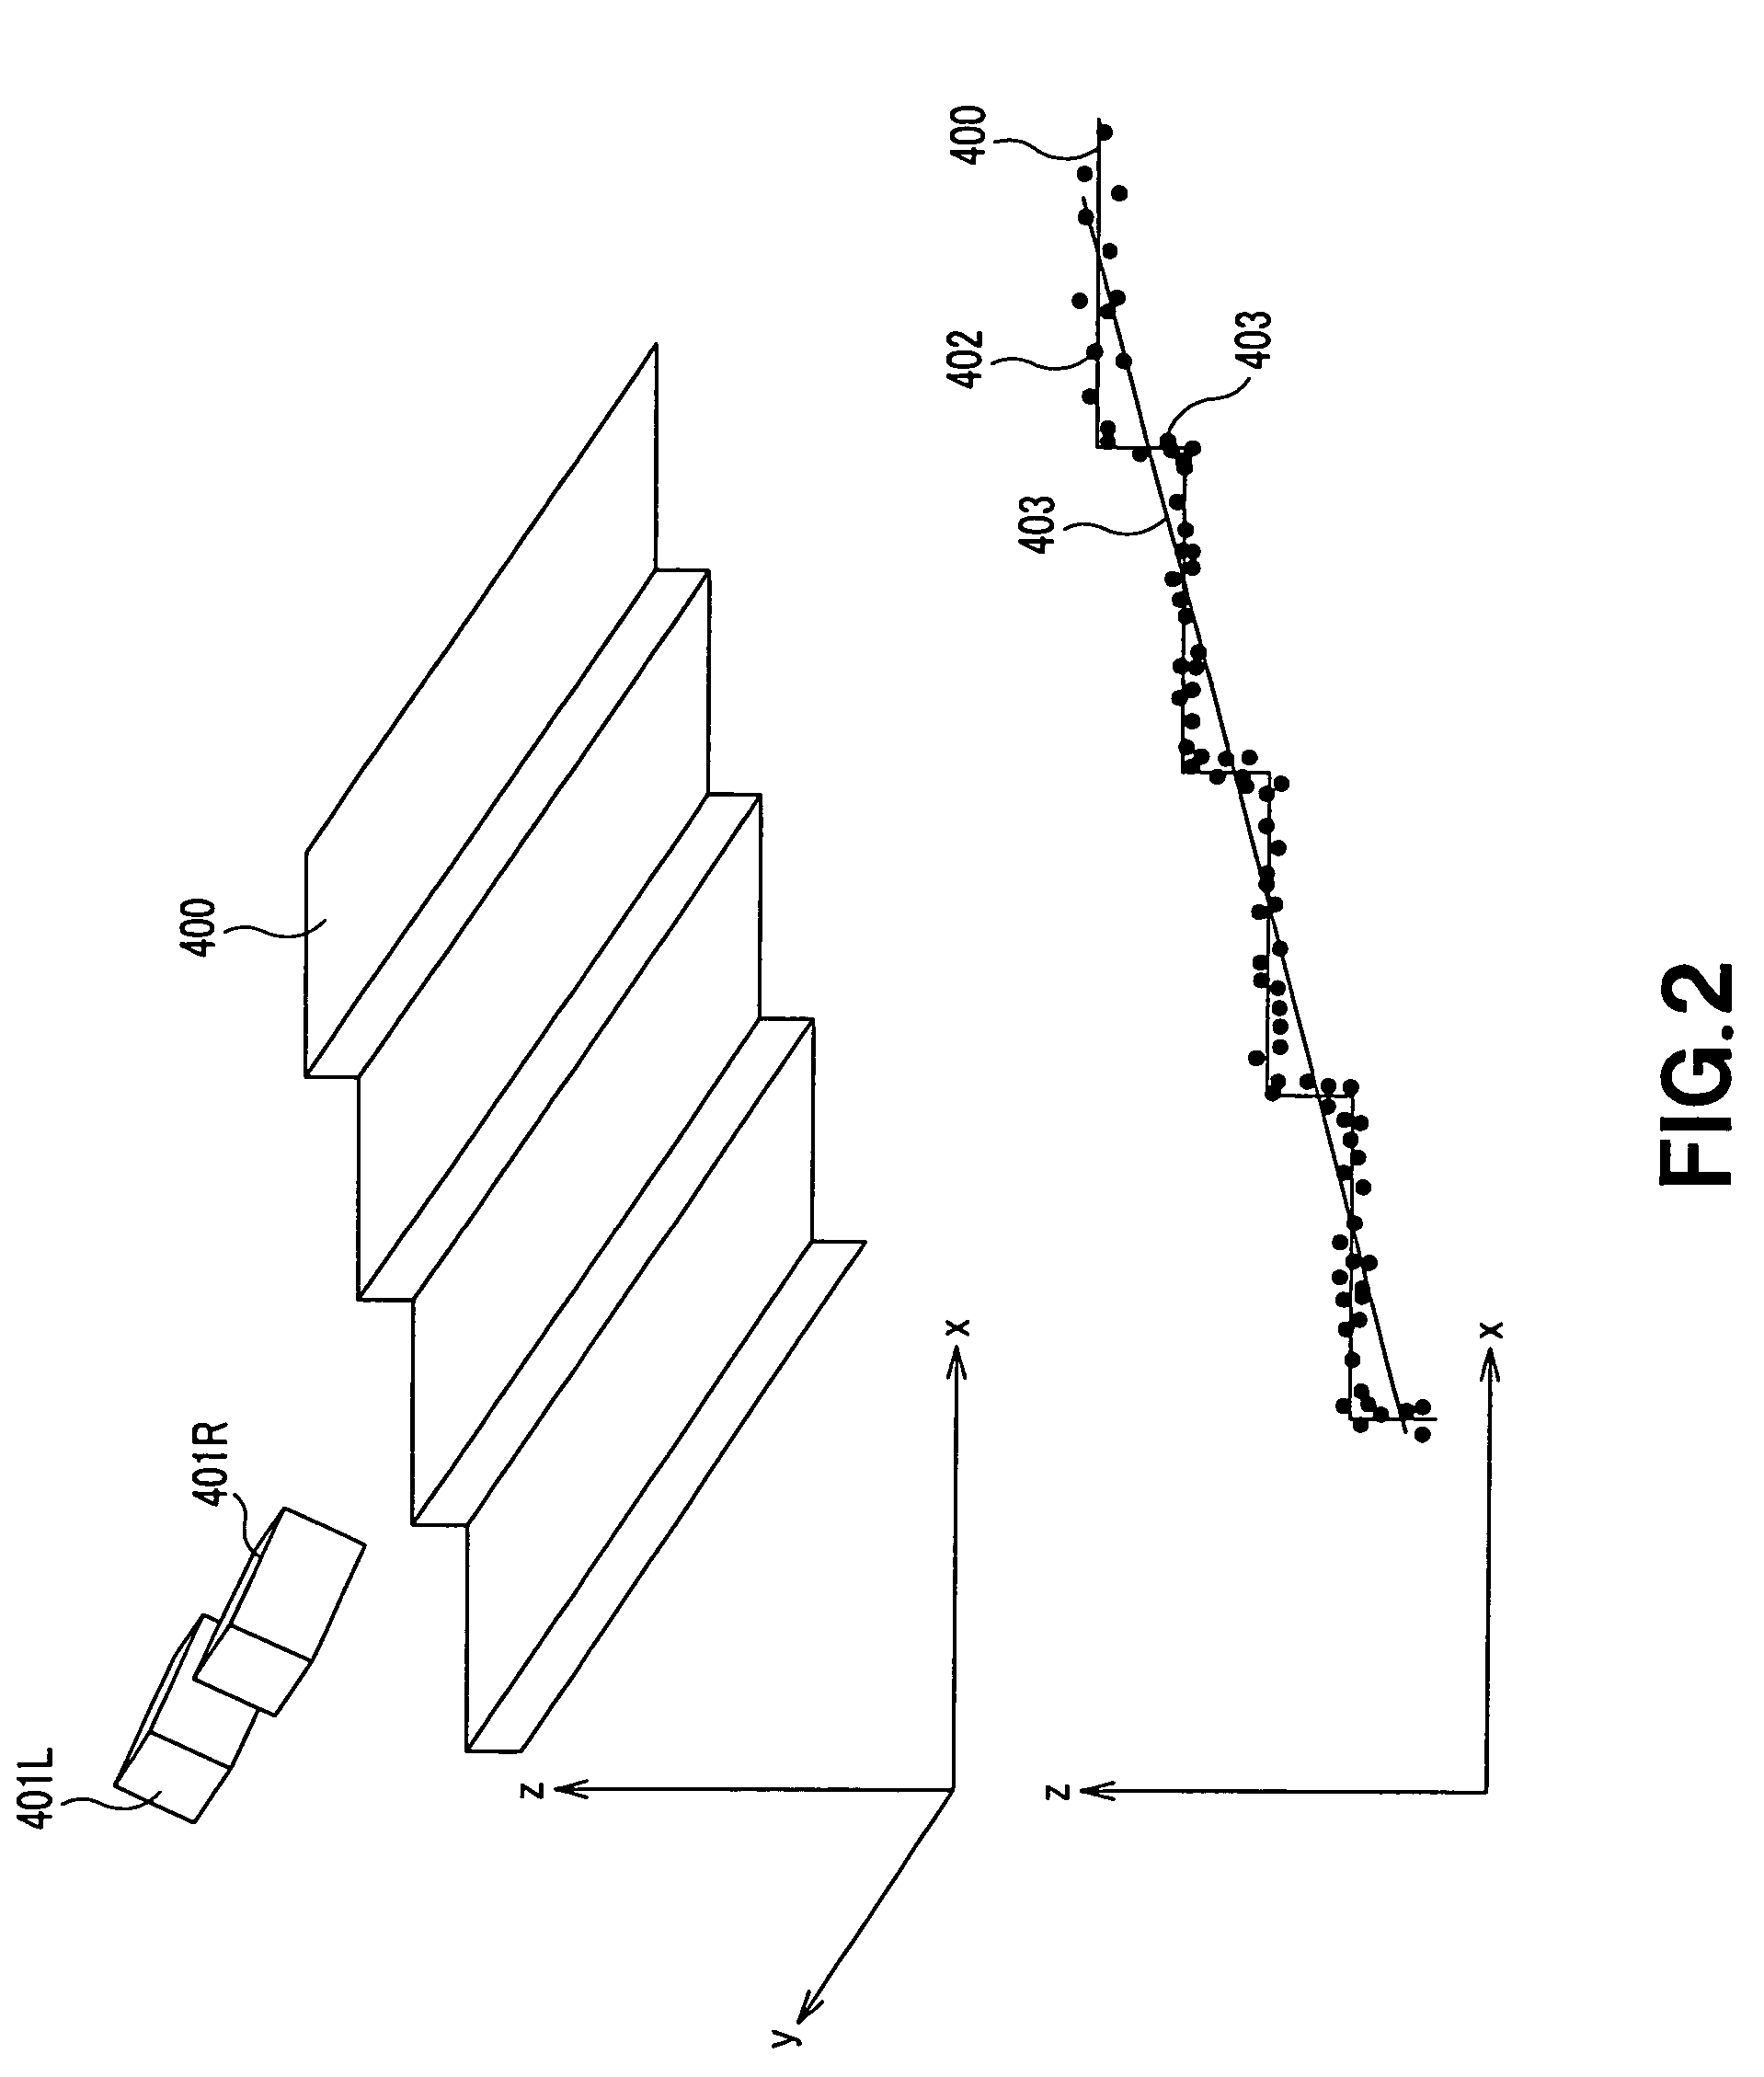 Method and Apparatus for Detecting Plane, and Robot Apparatus Having Apparatus for Detecting Plane